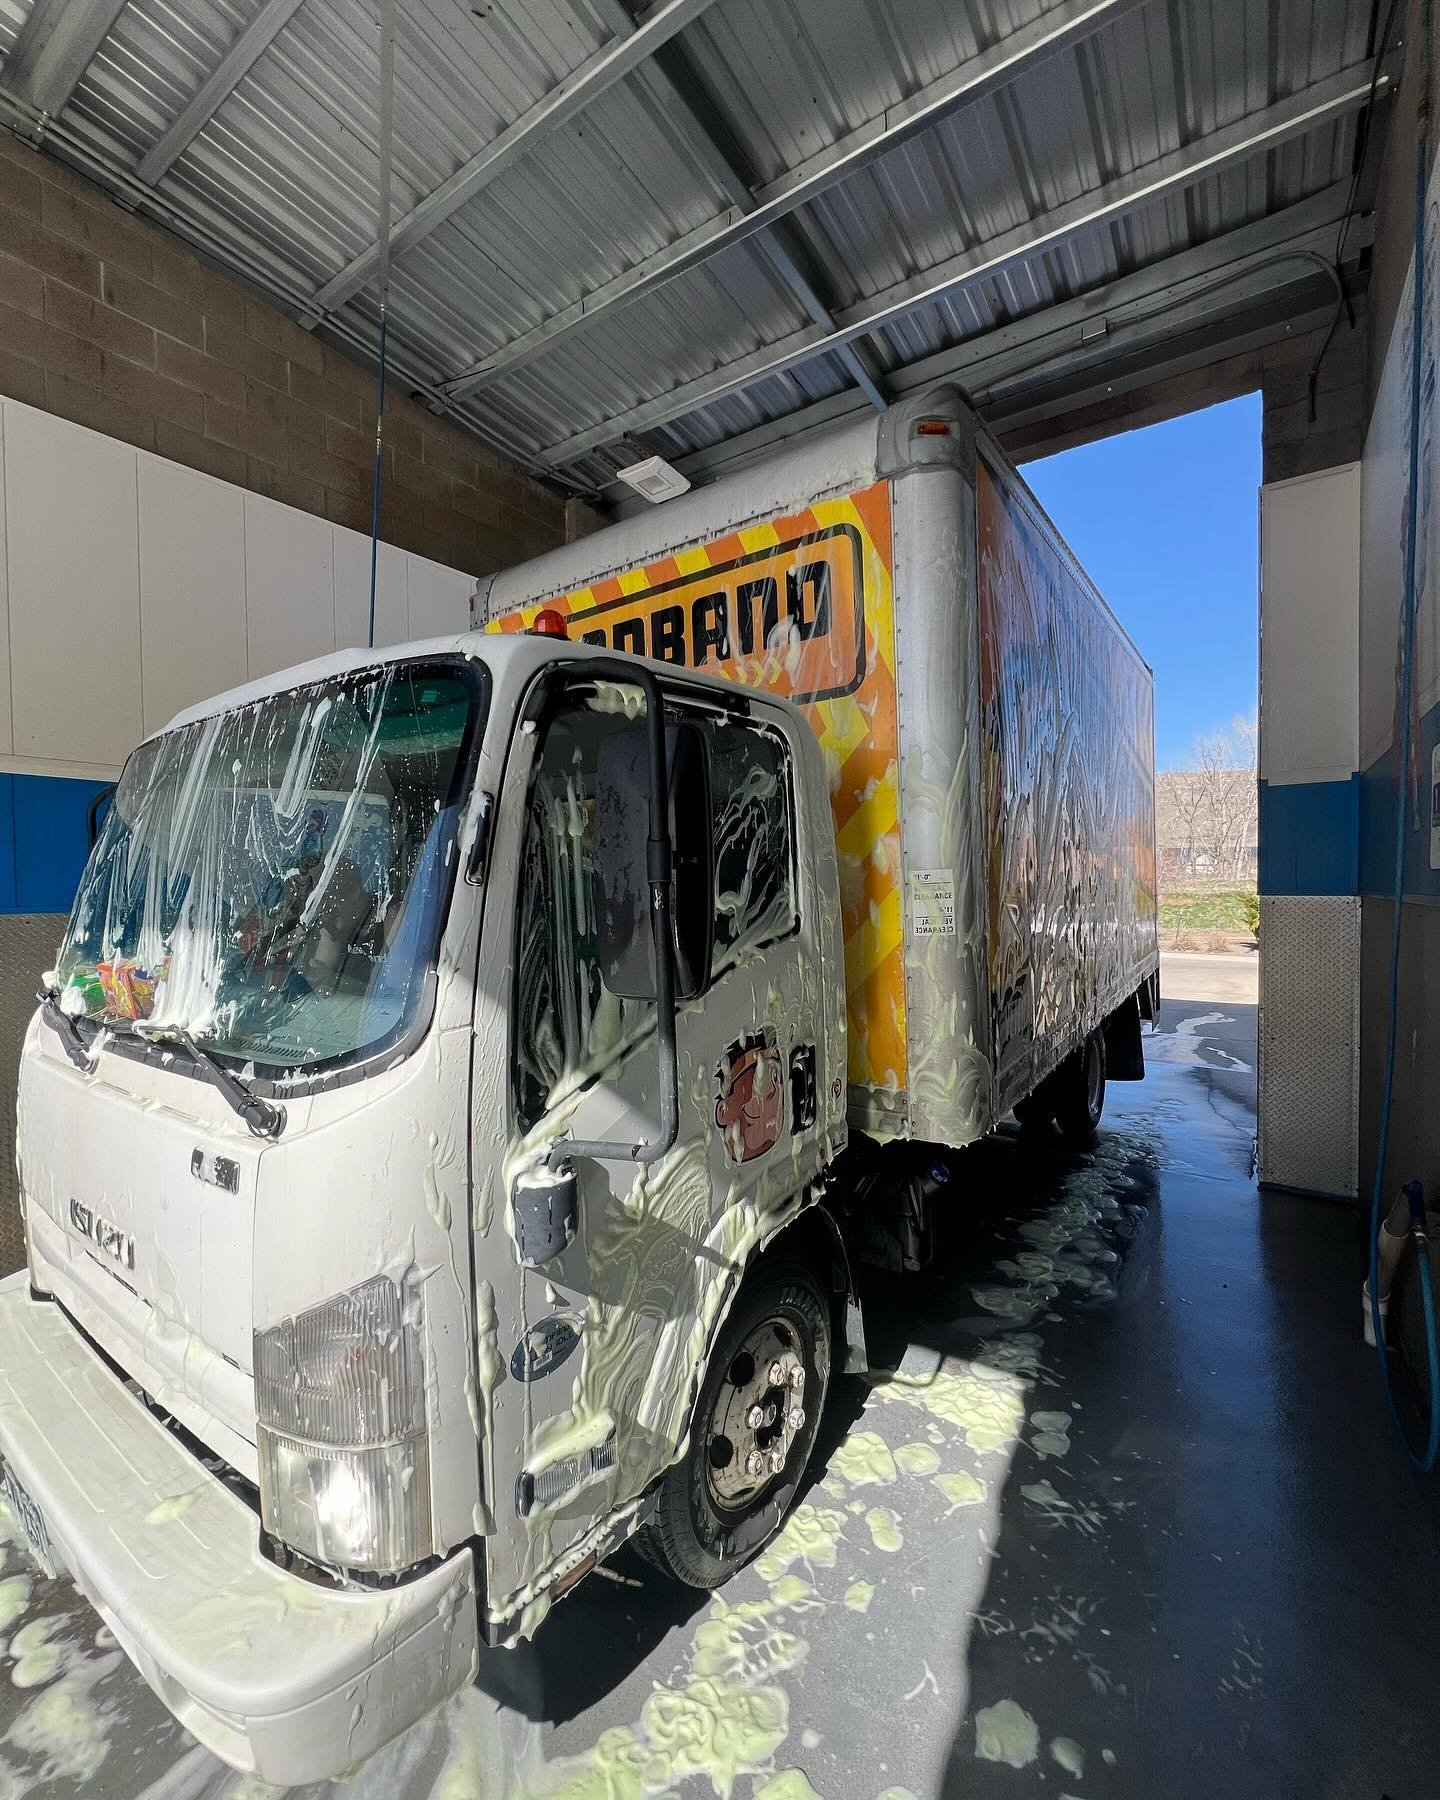 First wash of the season for our smallest truck in the fleet. 

So fresh and so clean clean.